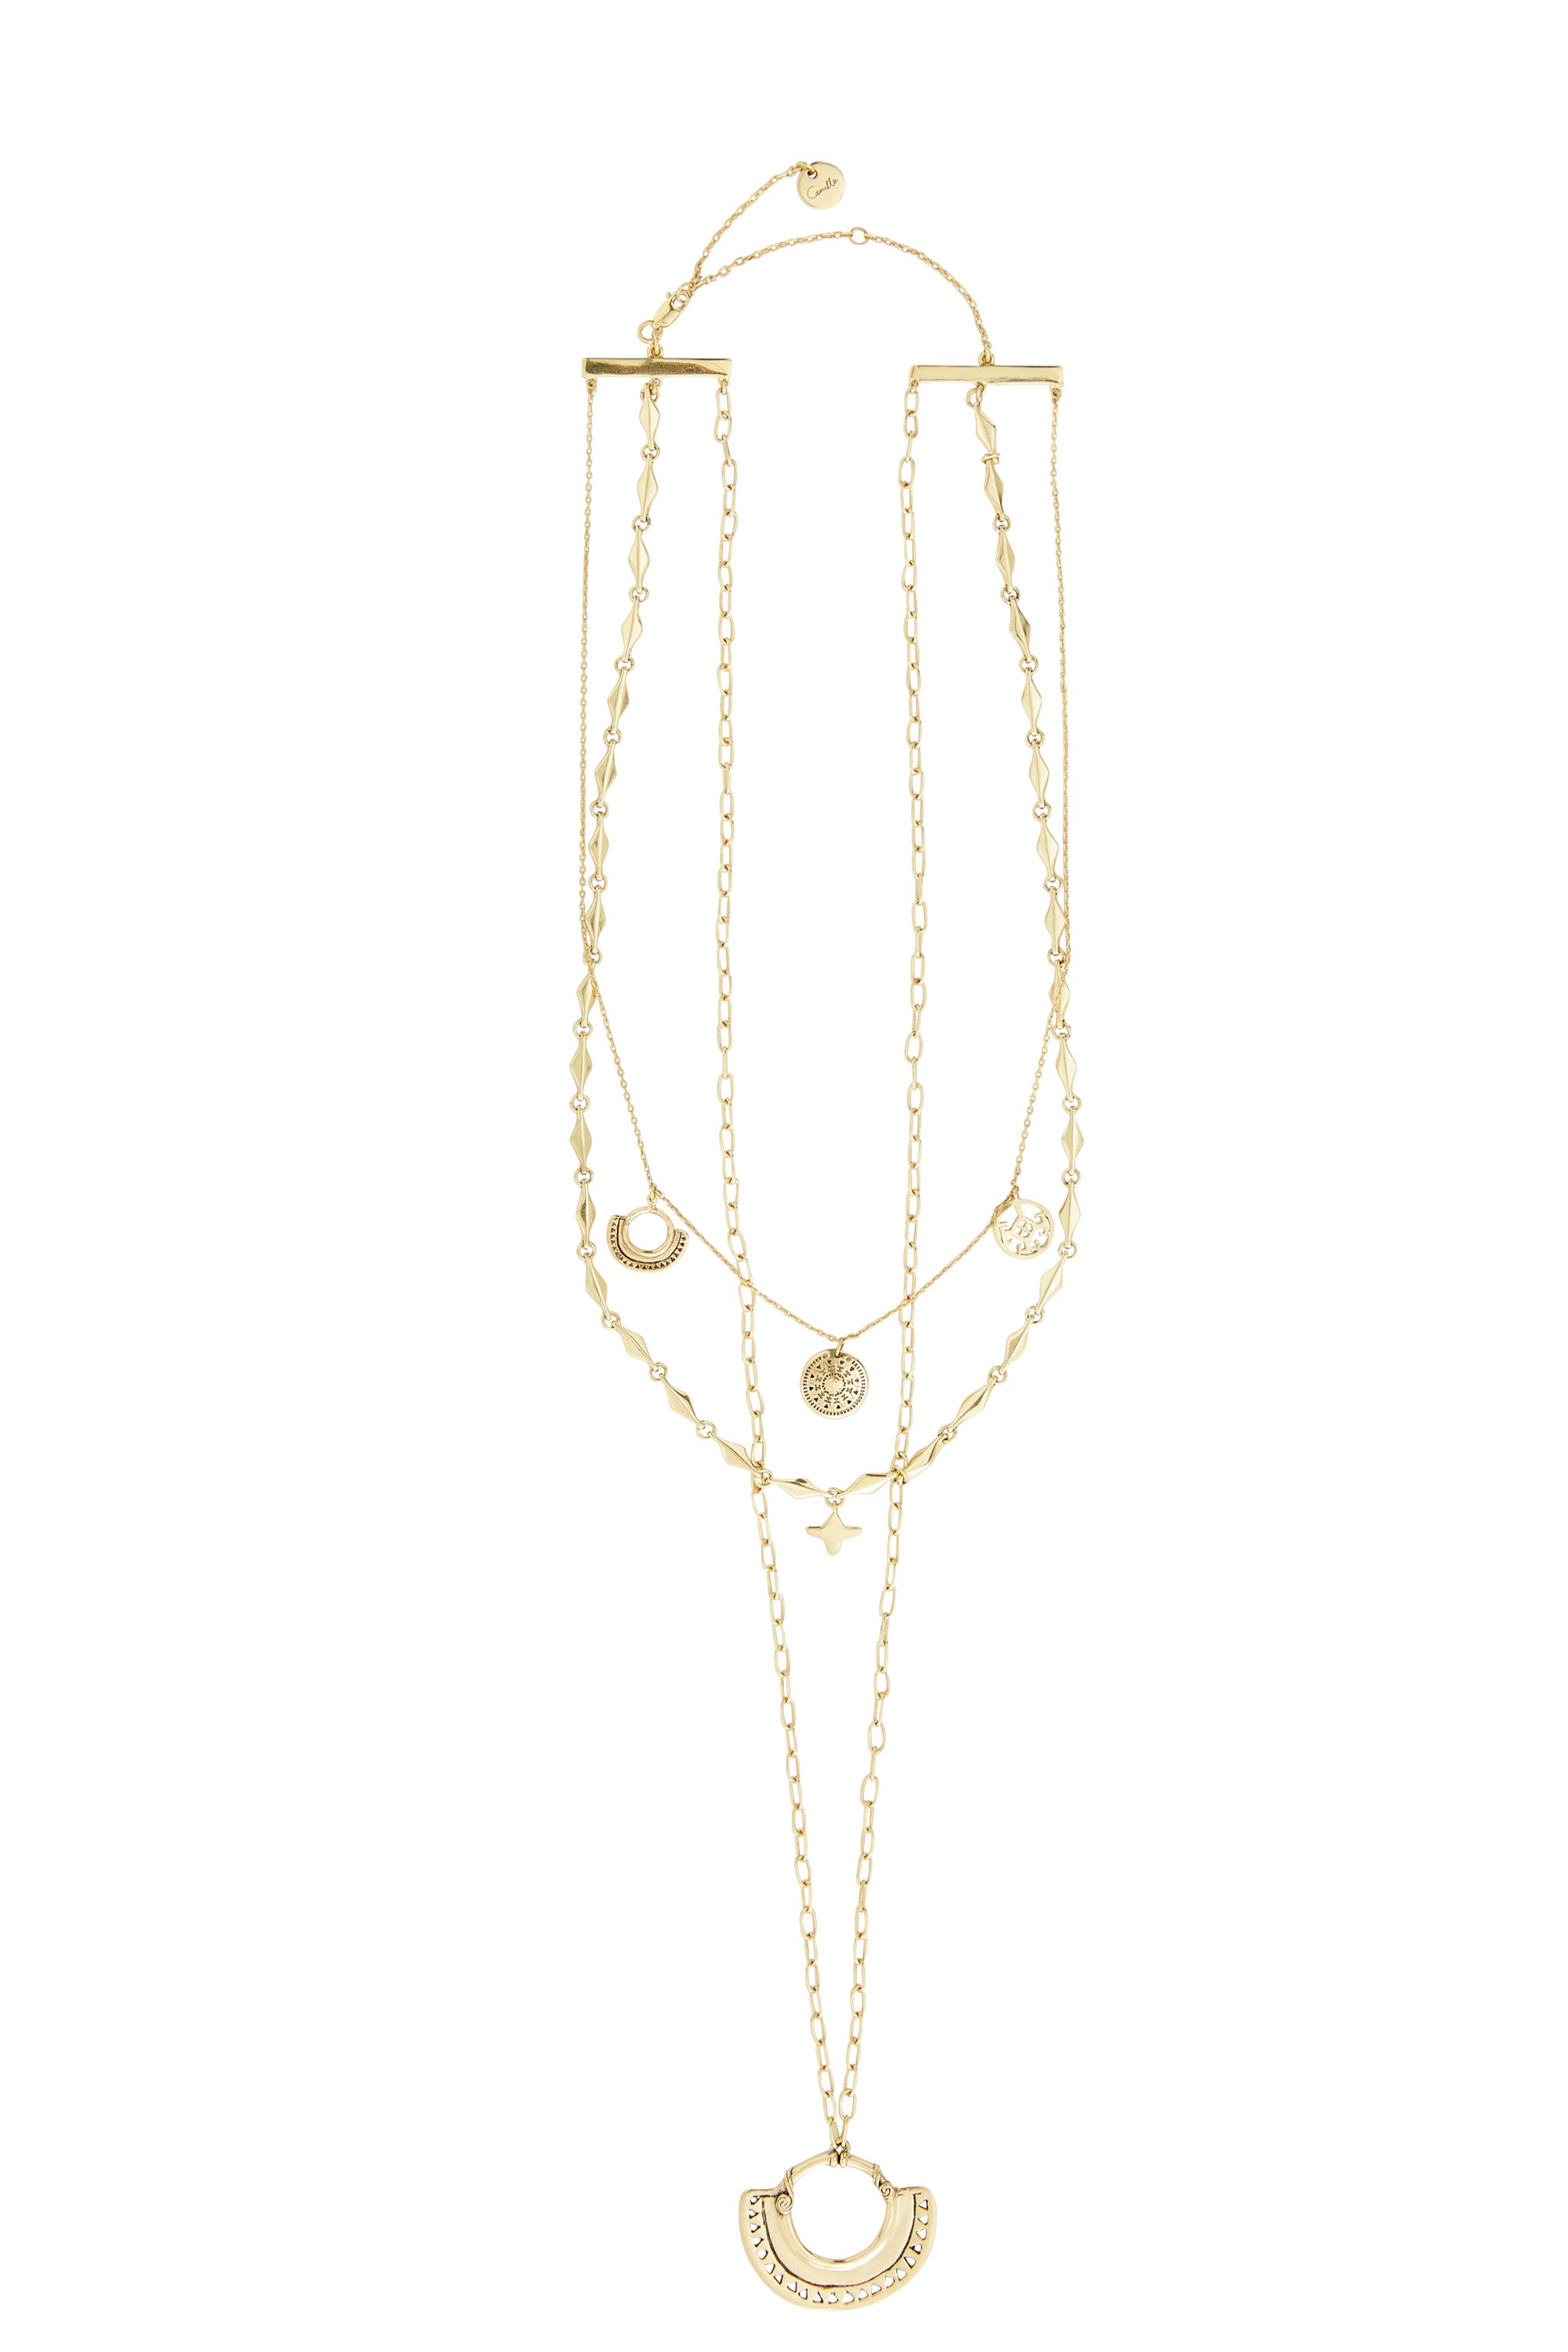 GOLD BRASS LAYERED CHAIN NECKLACE